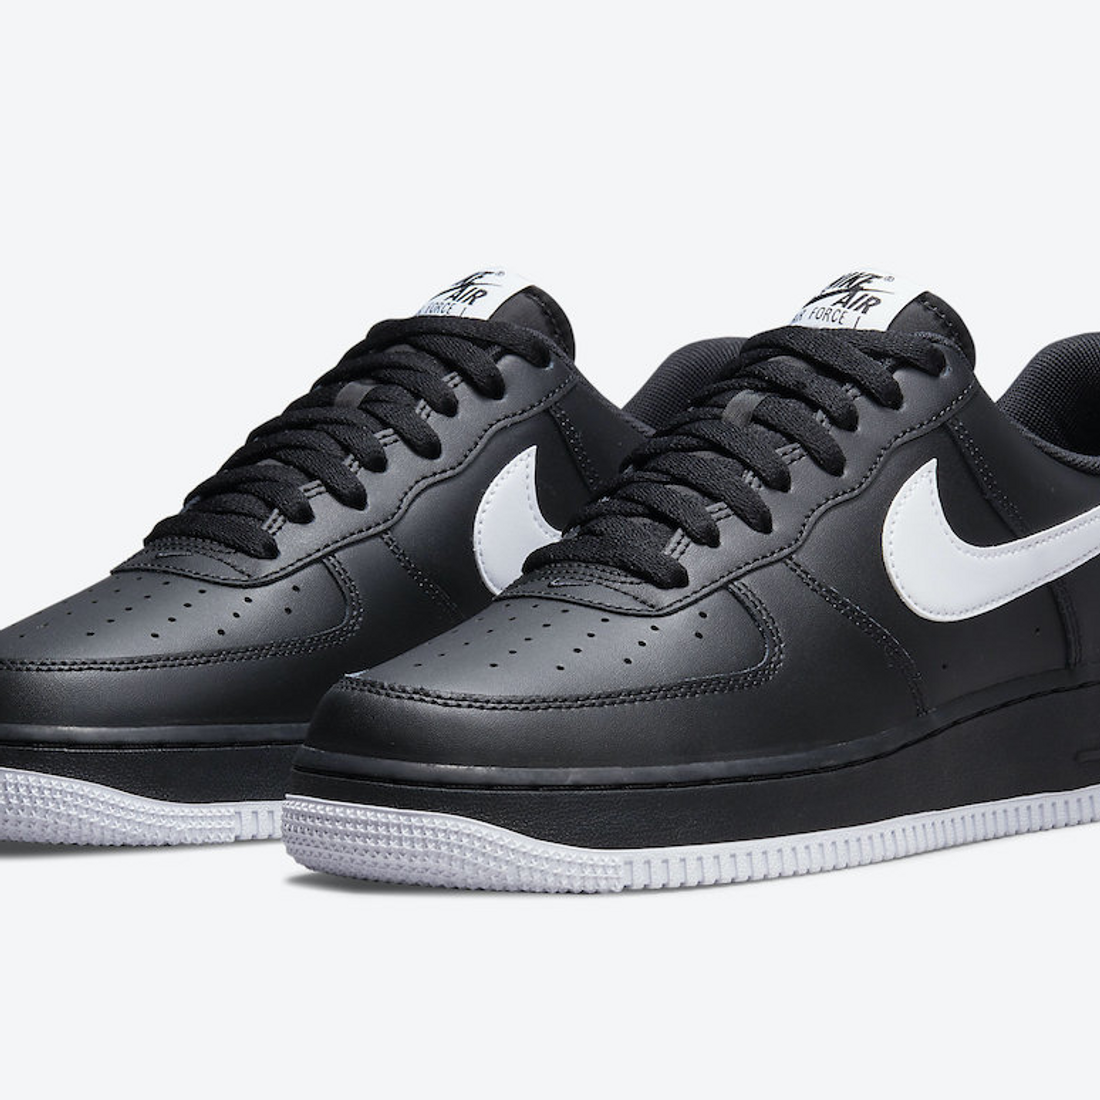 Black and White Nike Air Force 1 Resembles Rare 'The Black Album' Edition -  Sneaker Freaker